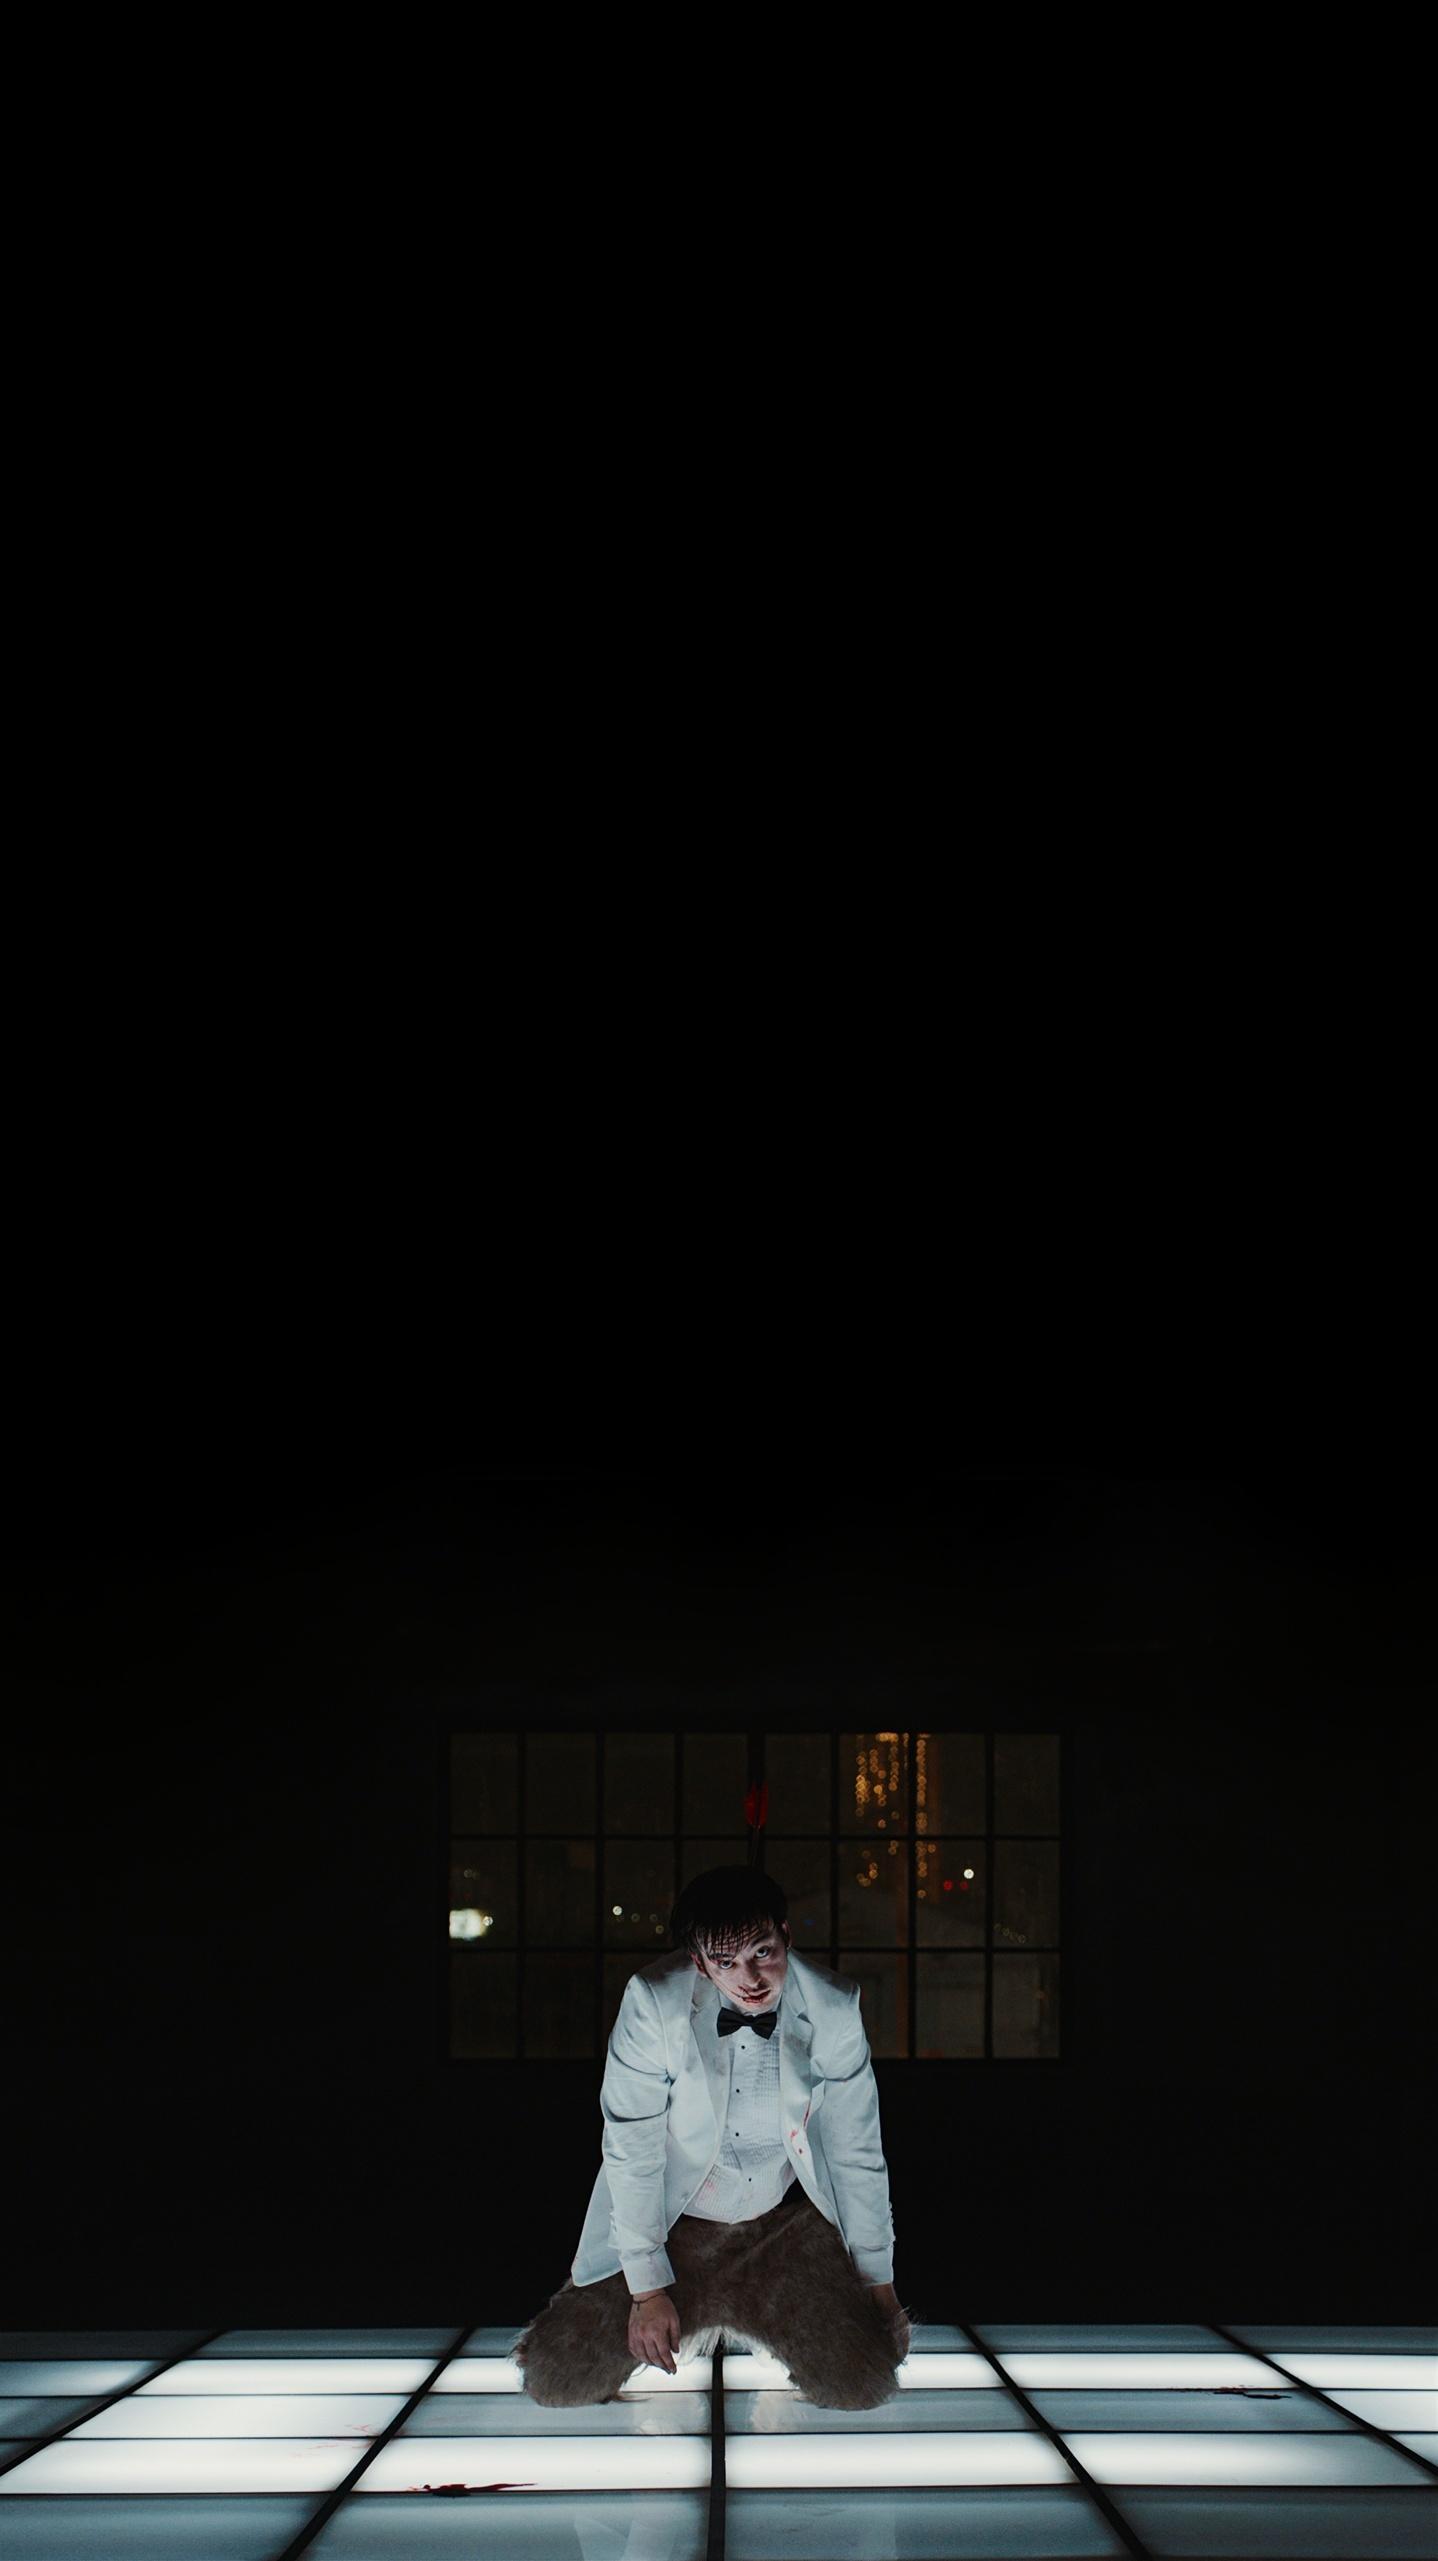 A joji wallpaper I made from slow dancing in the dark